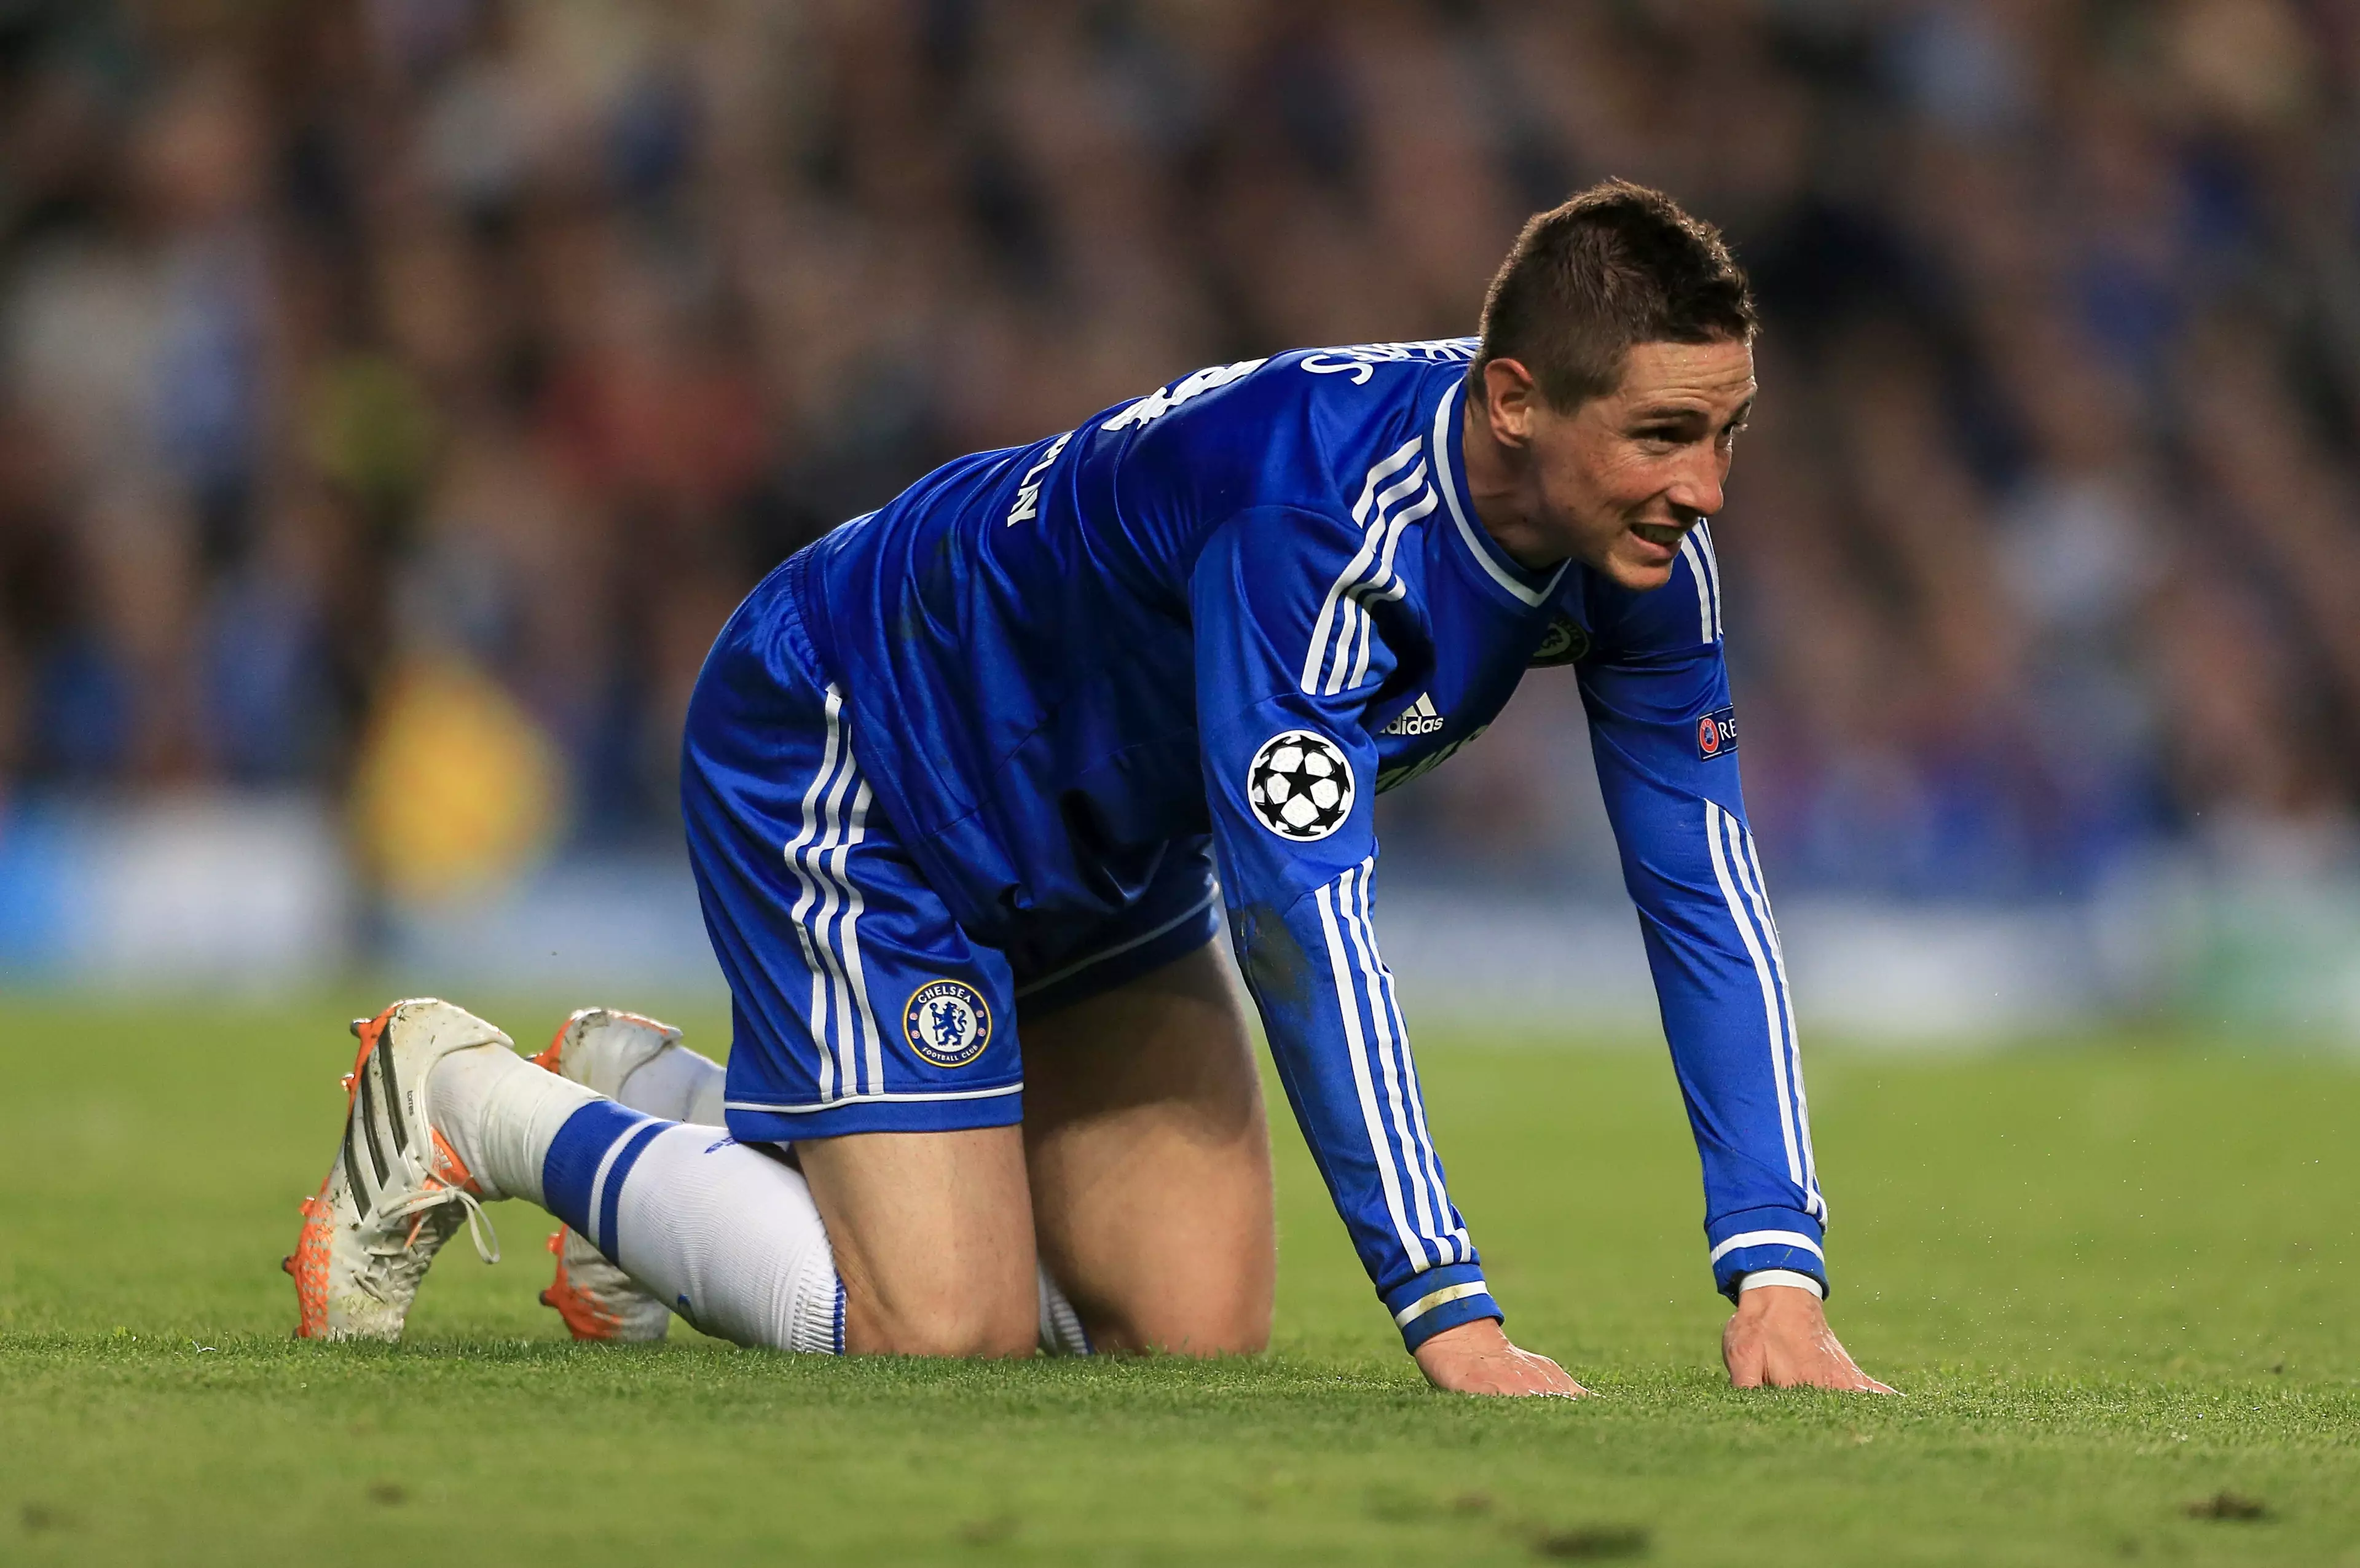 Torres's move to the Blues didn't work out at all. Image: PA Images